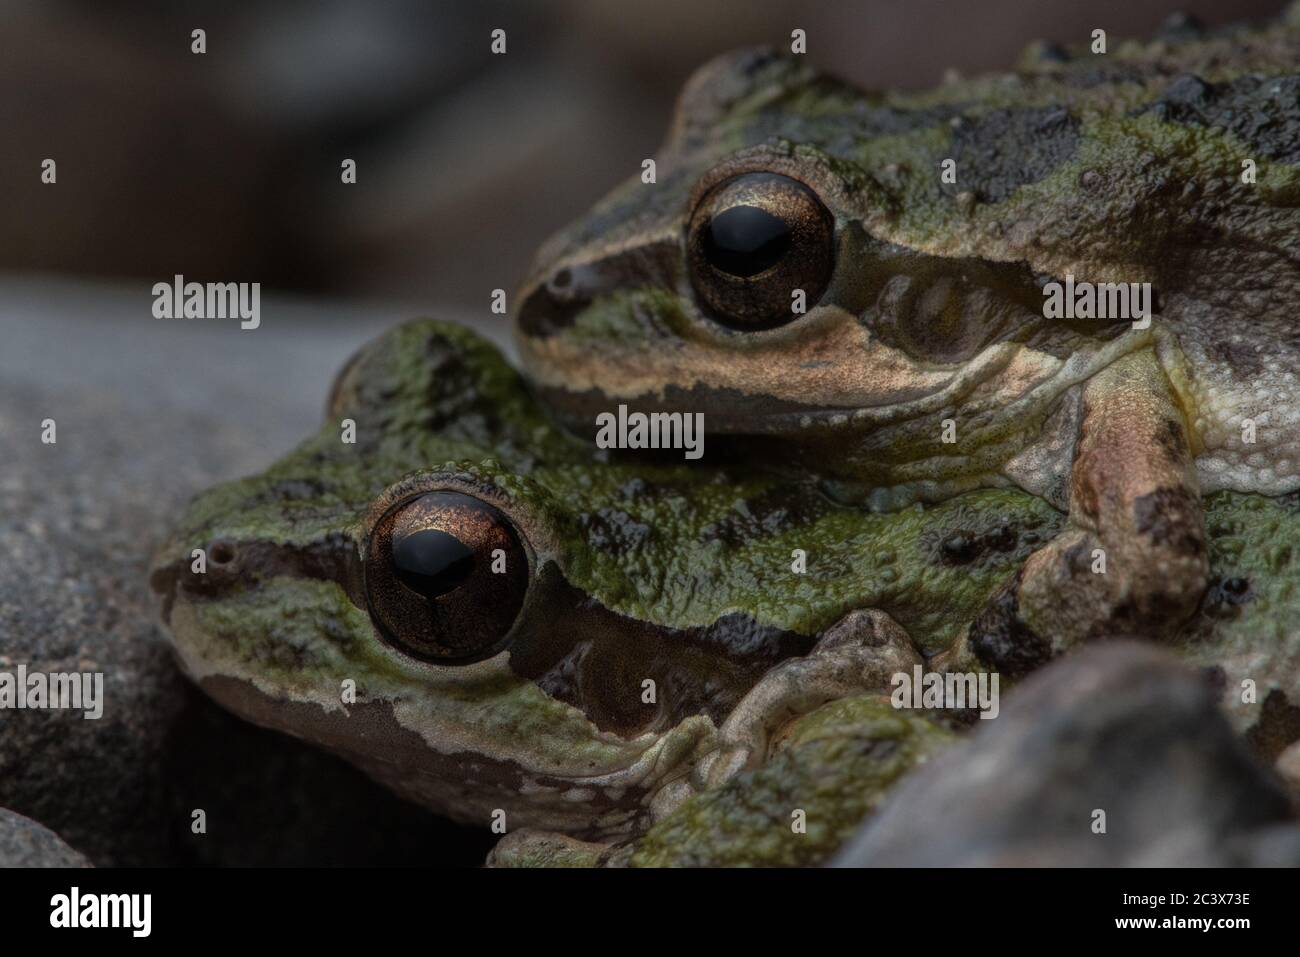 The pacific tree frog (Pseudacris sierra), a pair in amplexus the mating grasp of frogs. Stock Photo